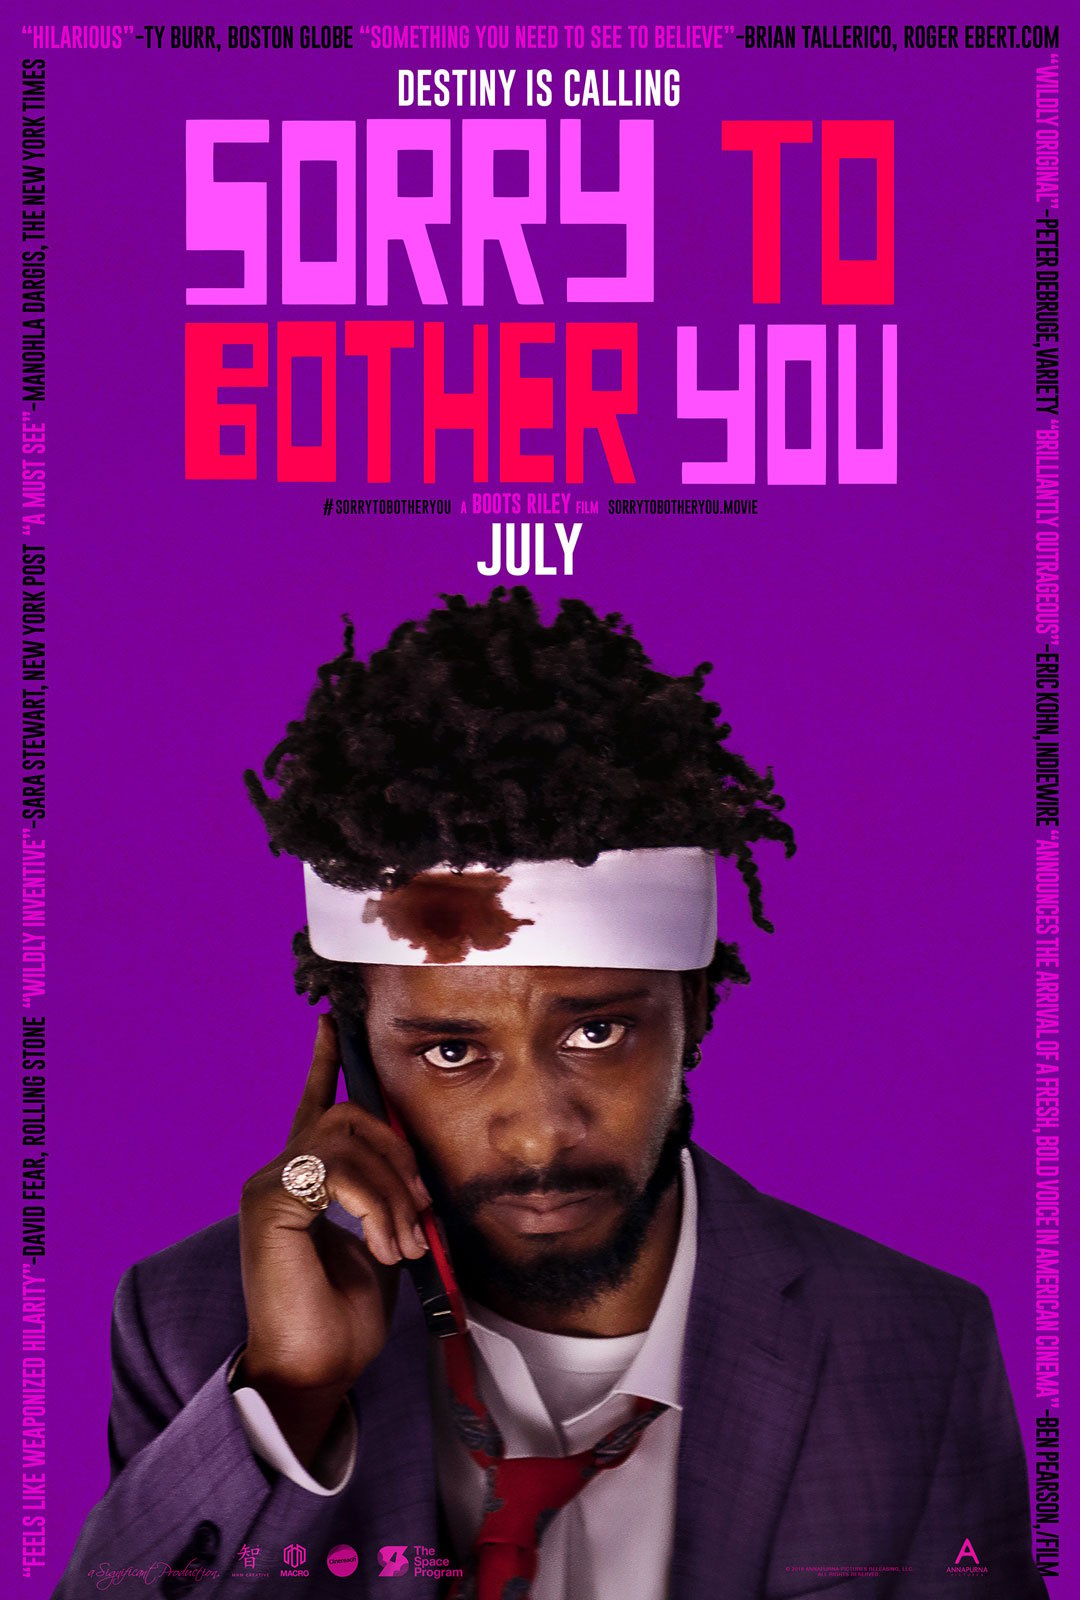 Sorry To Bother You - Film 2018 - FILMSTARTS.de